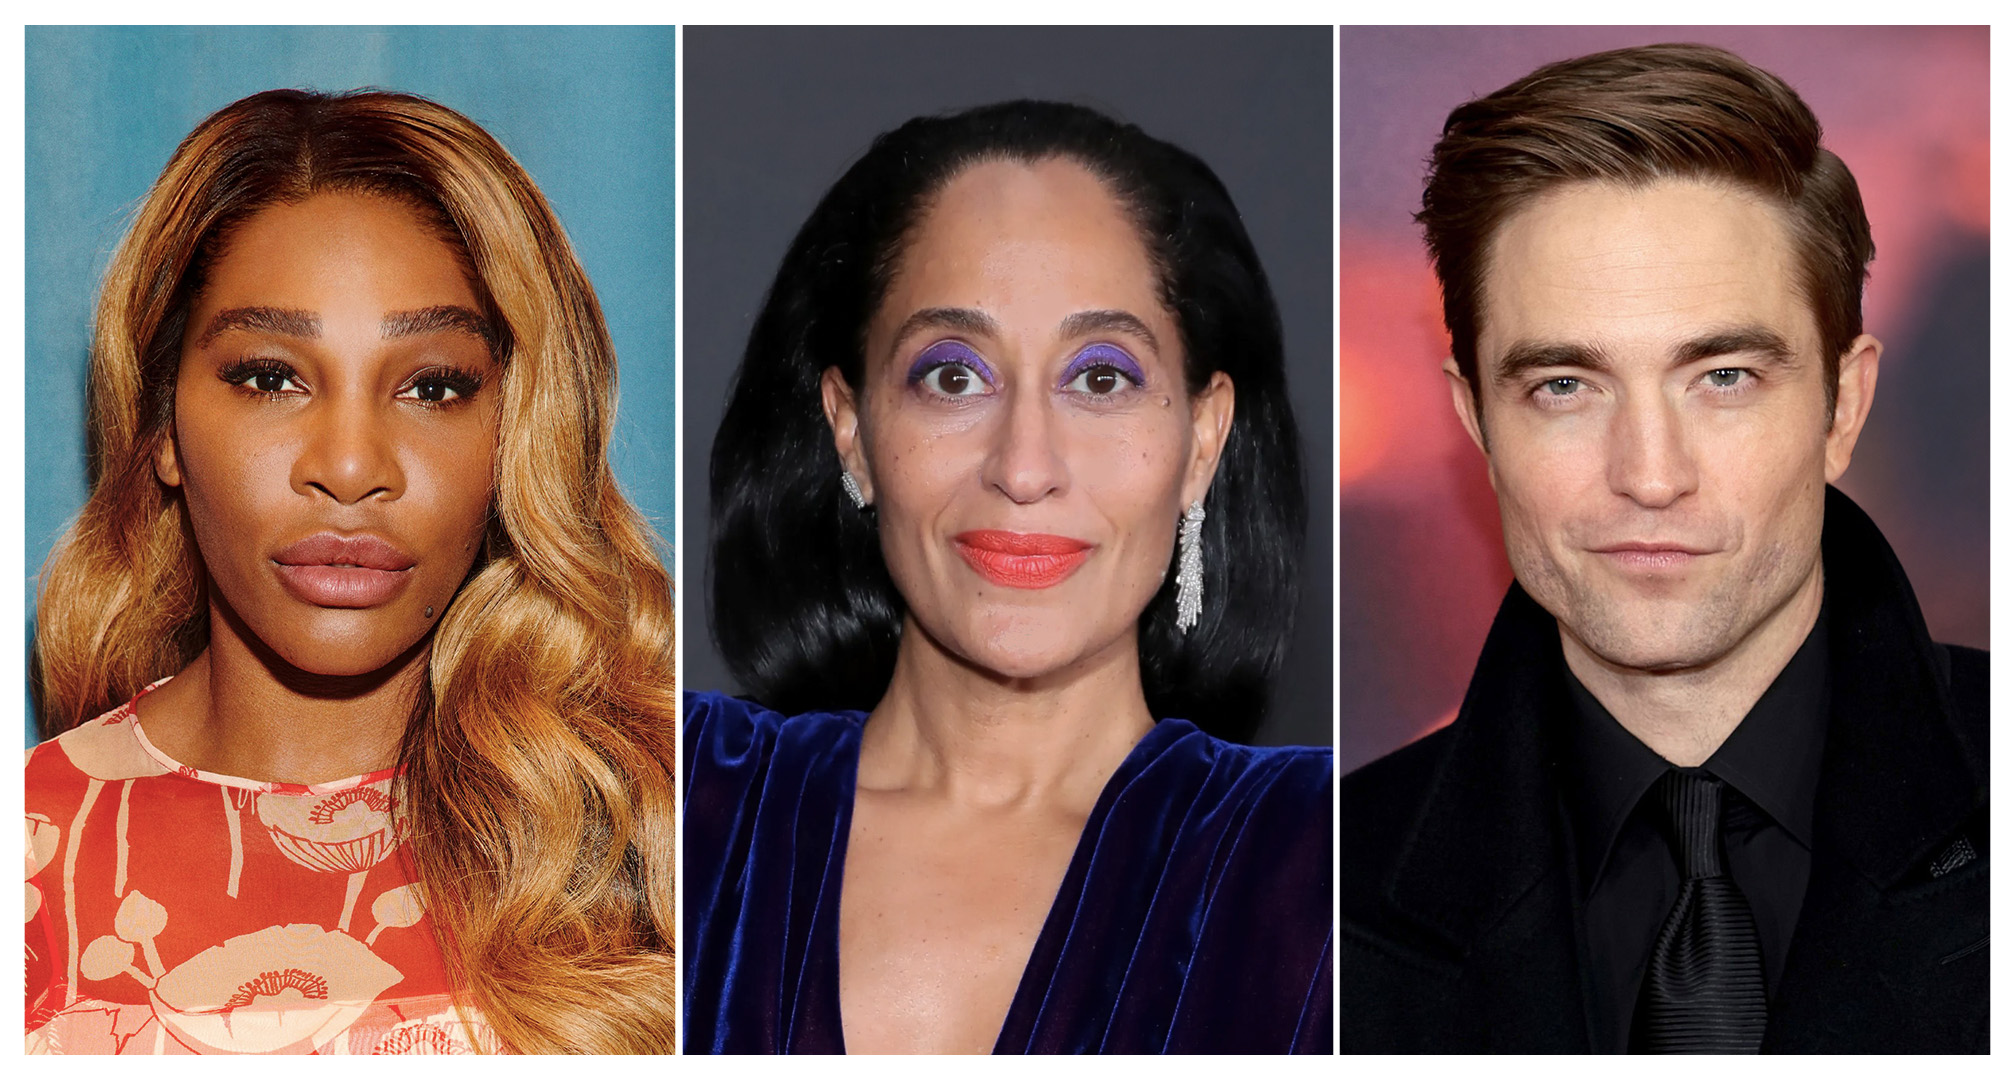 collage of serena williams, tracee ellis ross, and robert pattinson